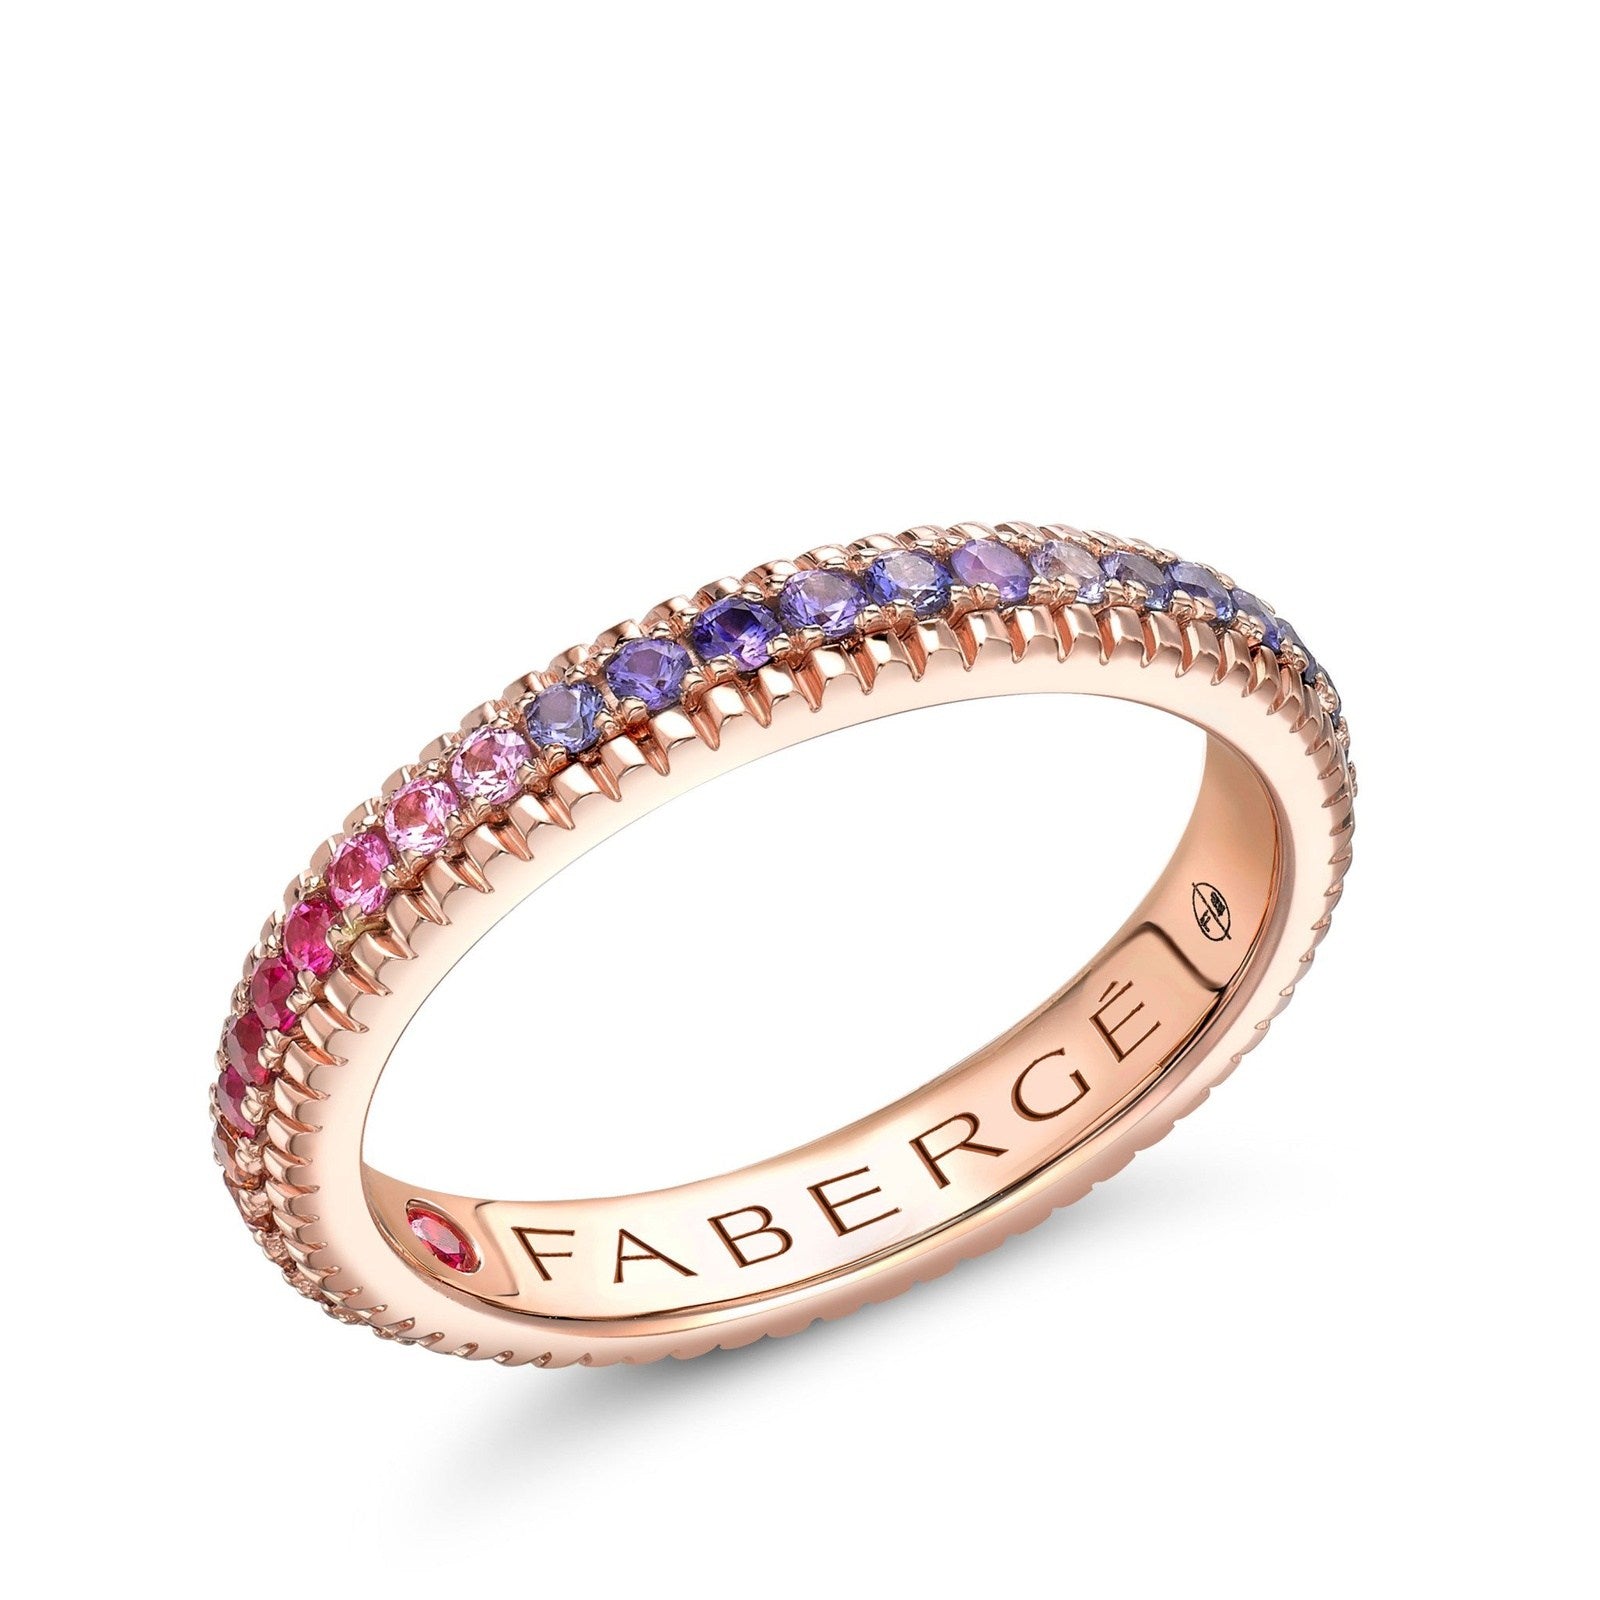 Faberge Colours of Love Rose Gold Rainbow Multicoloured Gemstone Set Fluted Ring  - 847RG2566